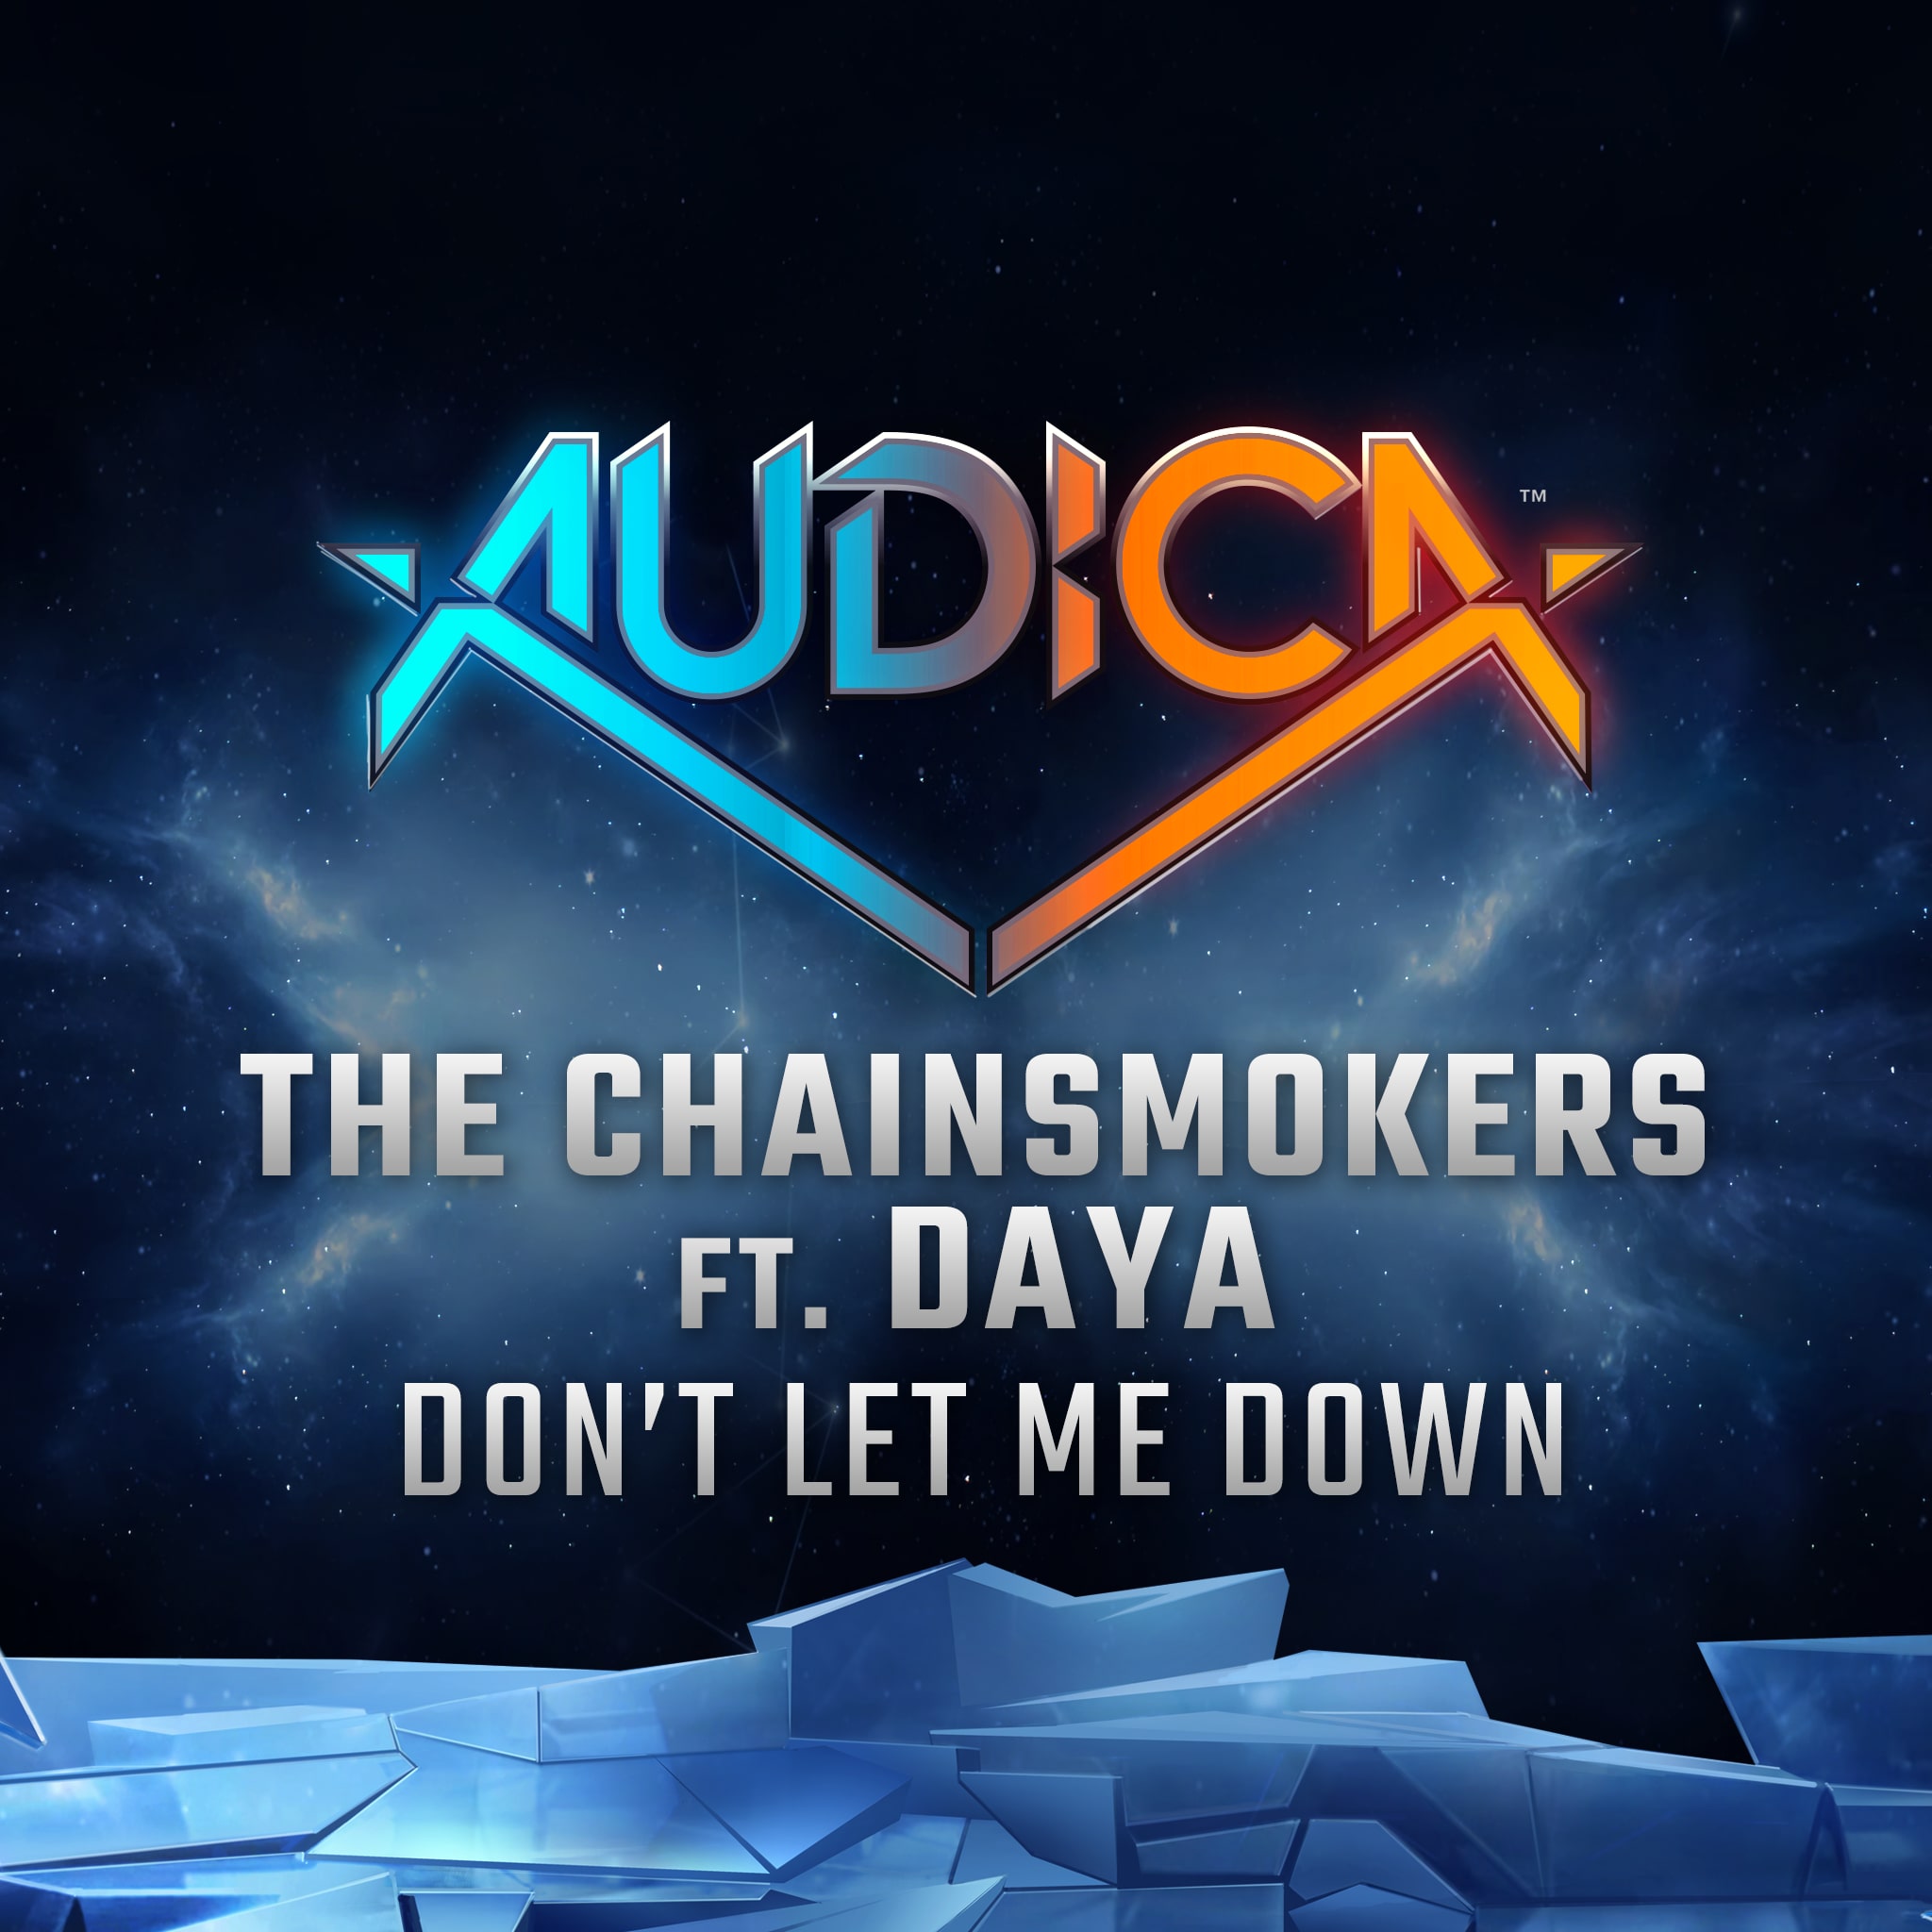 'Don't Let Me Down' -The Chainsmokers ft. Daya